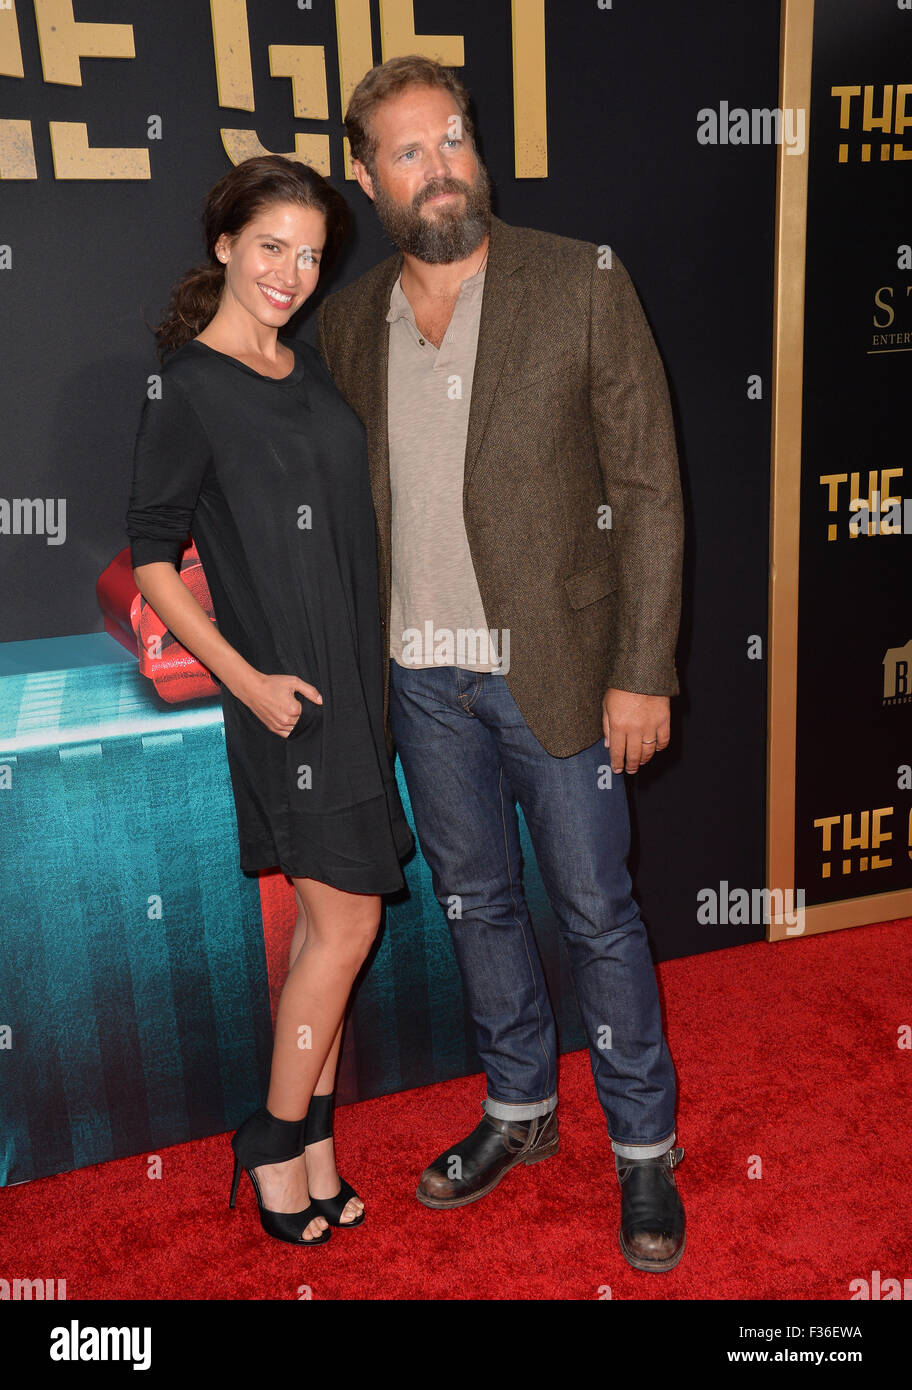 LOS ANGELES, CA - JULY 30, 2015: David Denman & wife Mercedes Mason at the world premiere of his movie 'The Gift' at the Regal Cinemas LA Live. Stock Photo